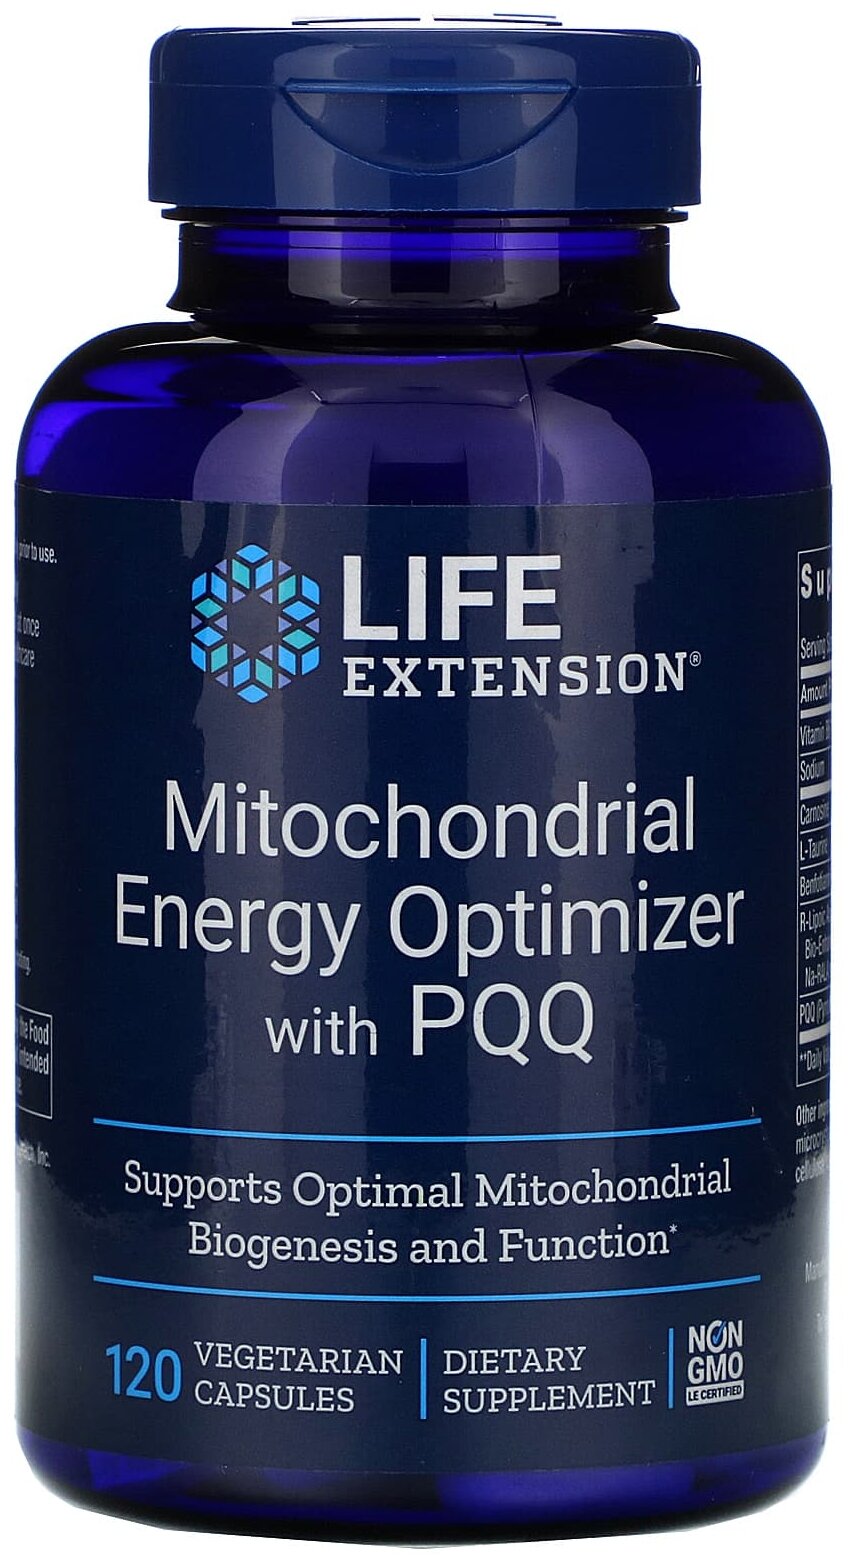 Капсулы Life Extension Mitochondrial Energy Optimizer with PQQ, 140 г, 120 шт.